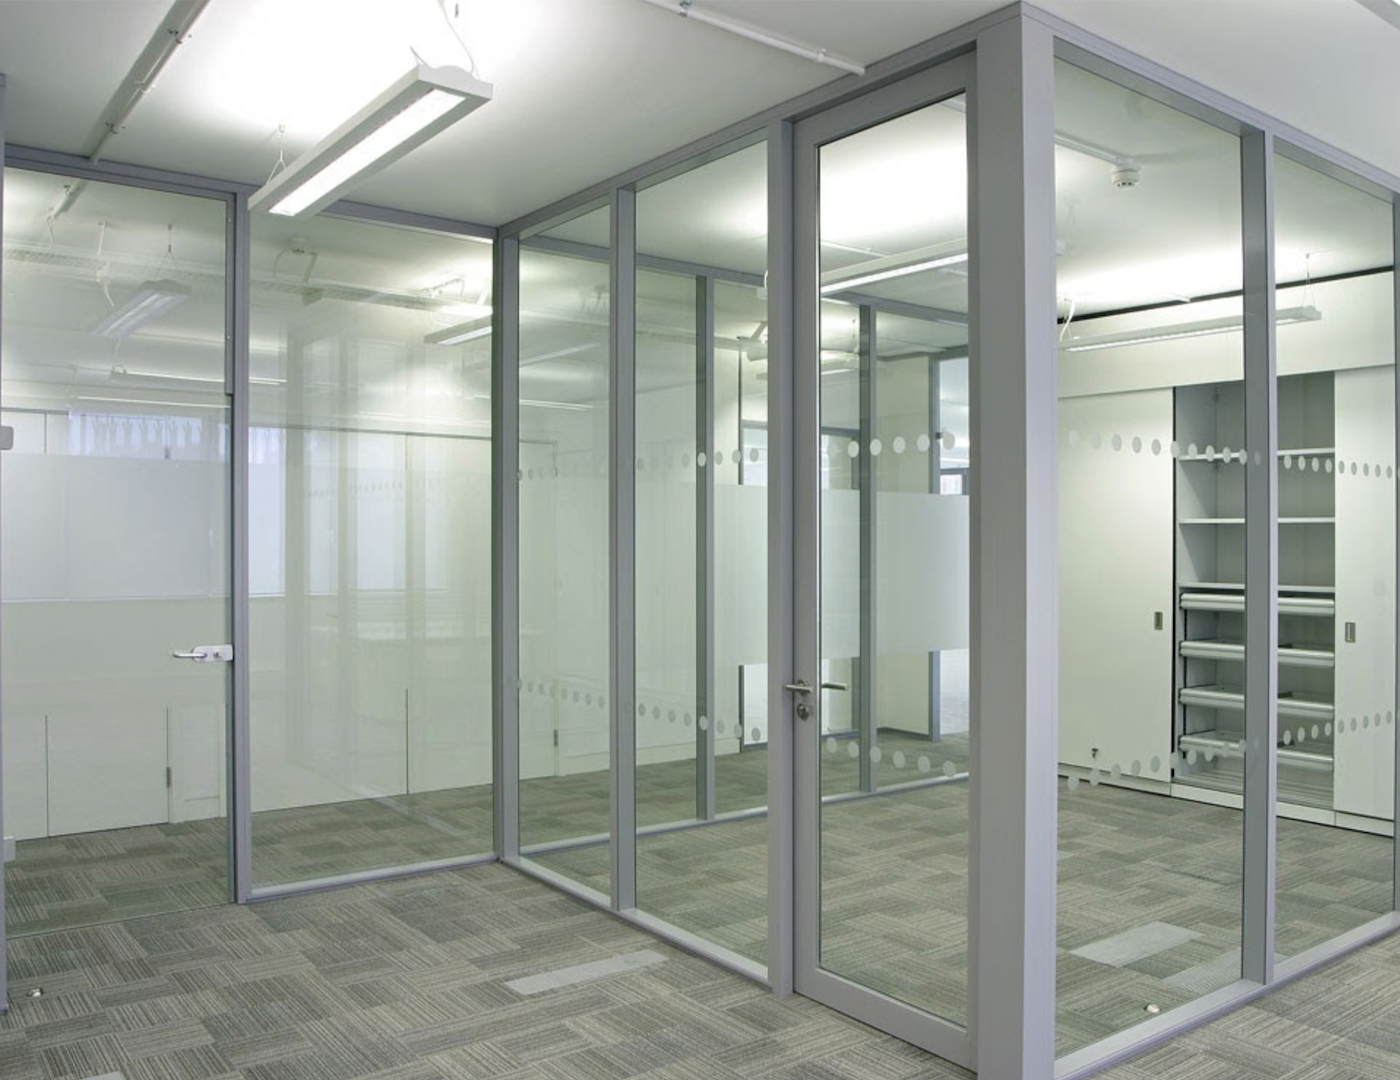 The hinged glass frame swing door can be free swing or self-closing